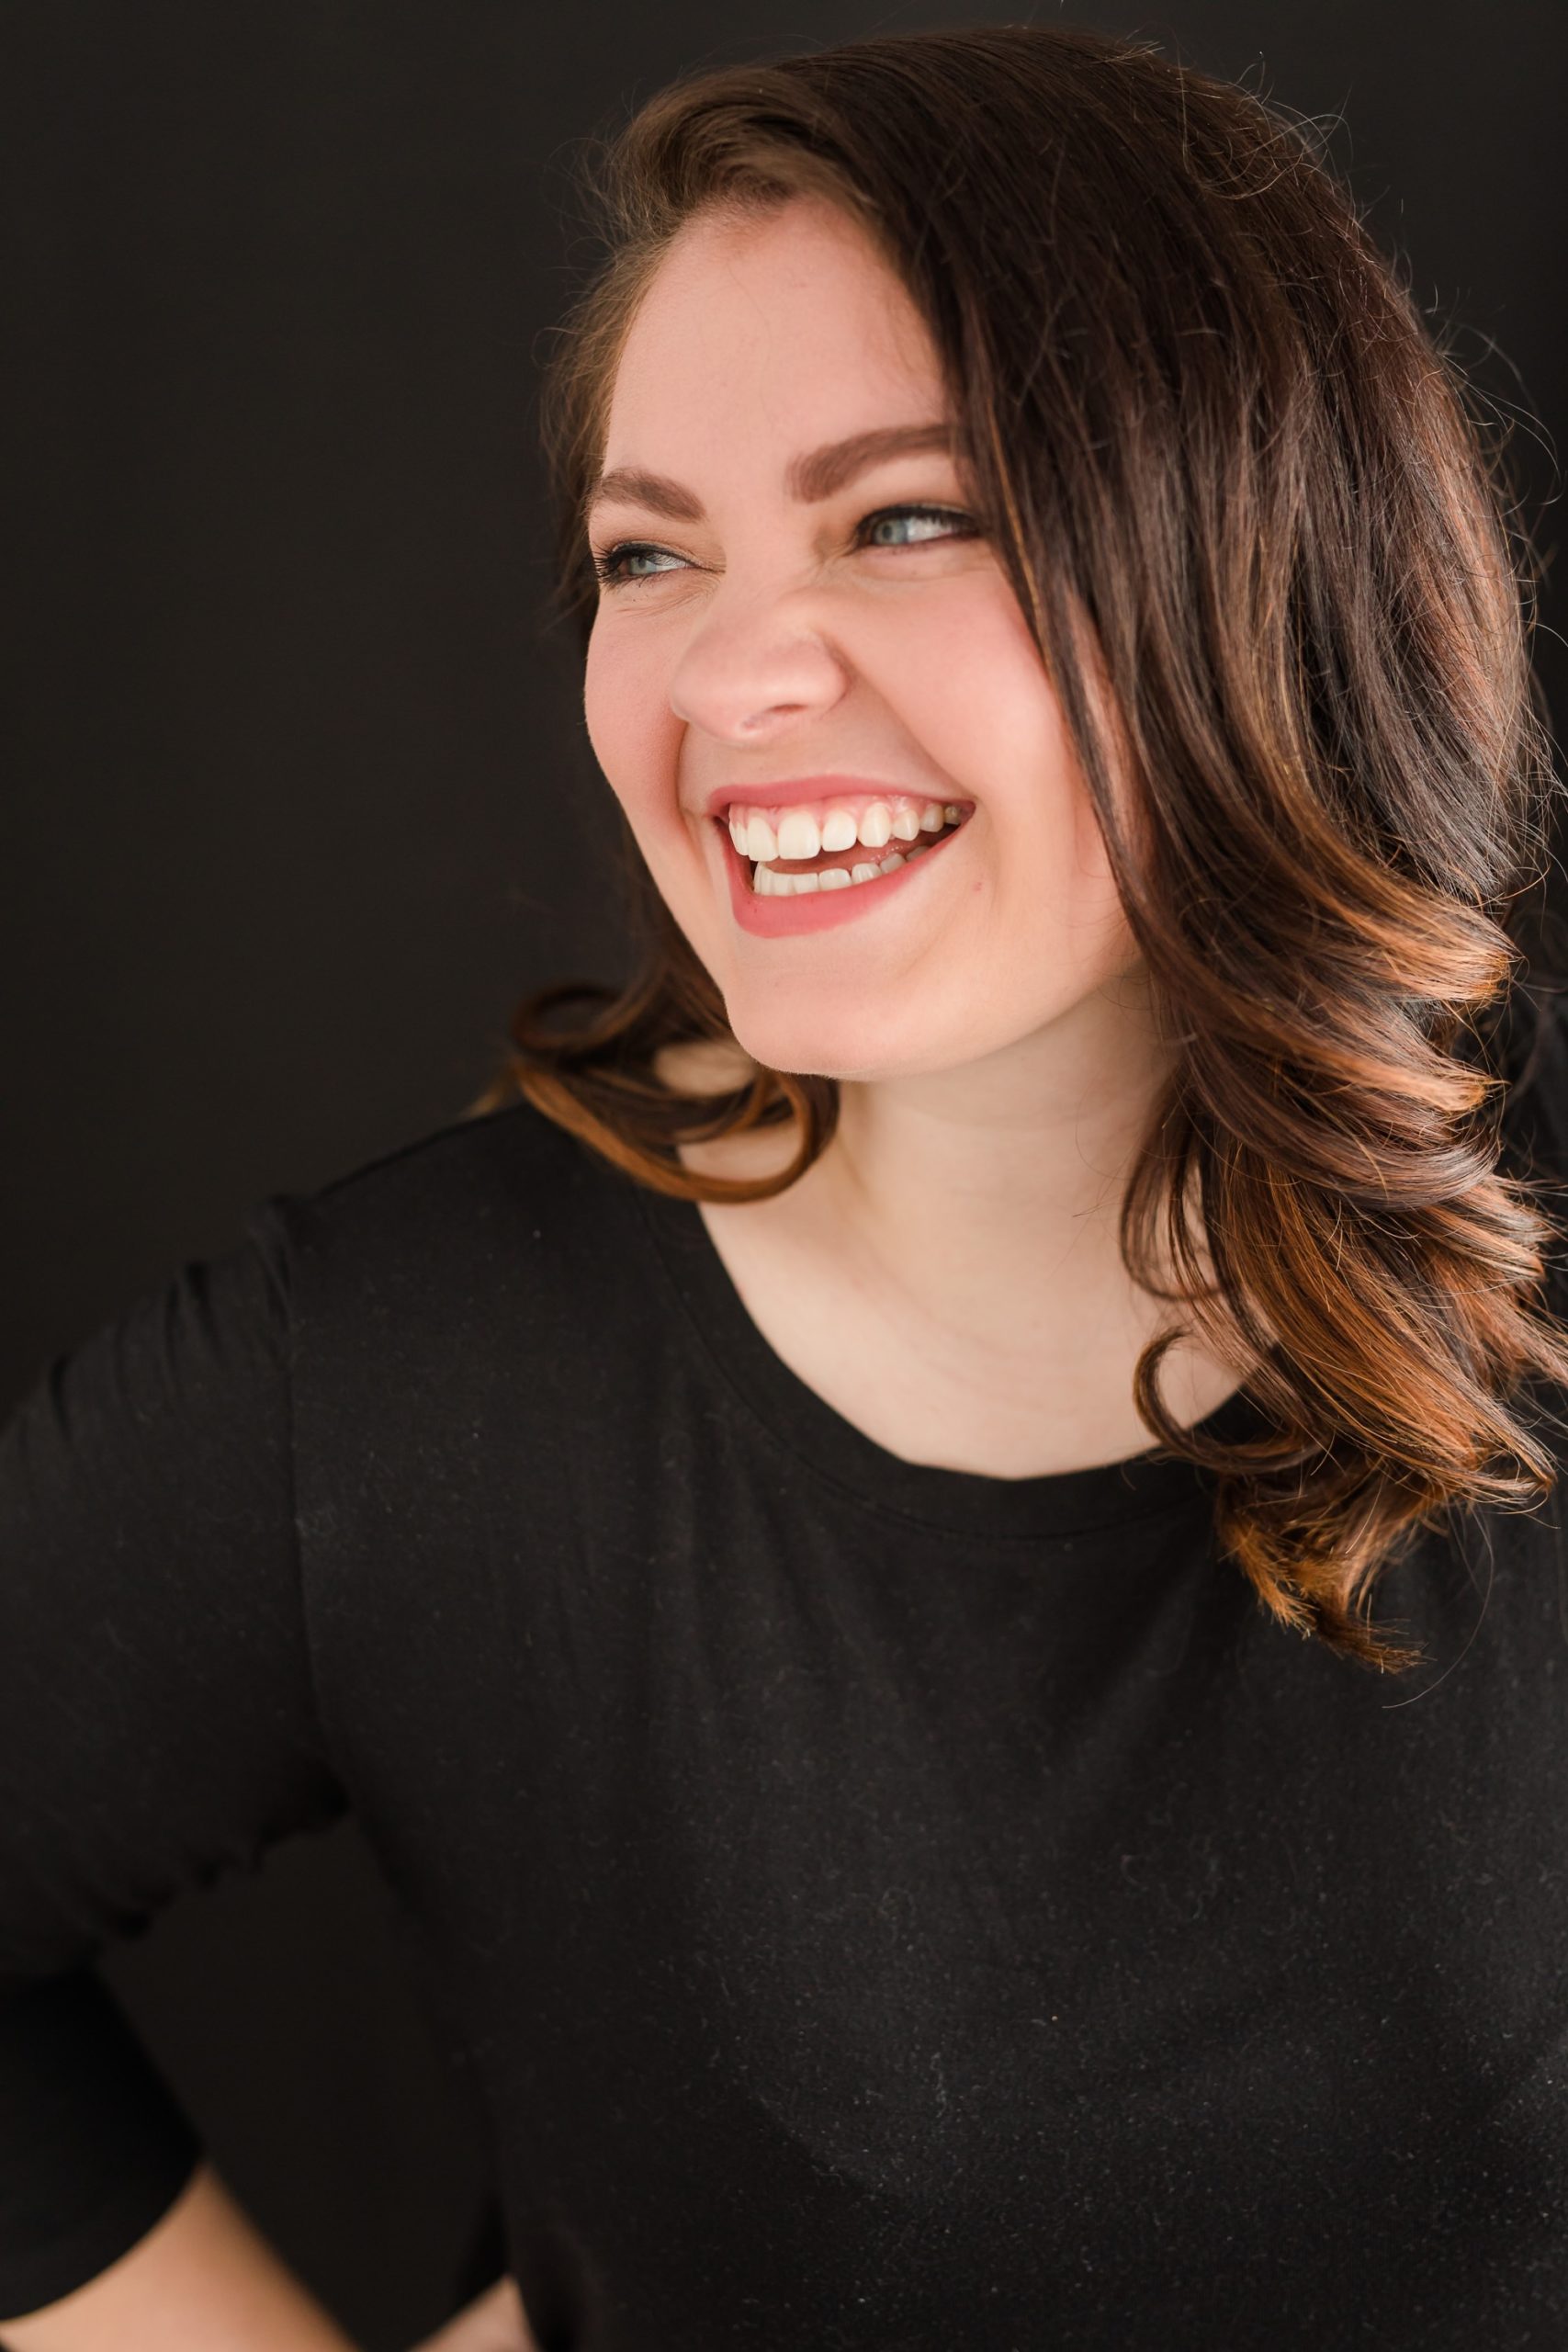 Business headshot, laughing off to the side on a black backdrop